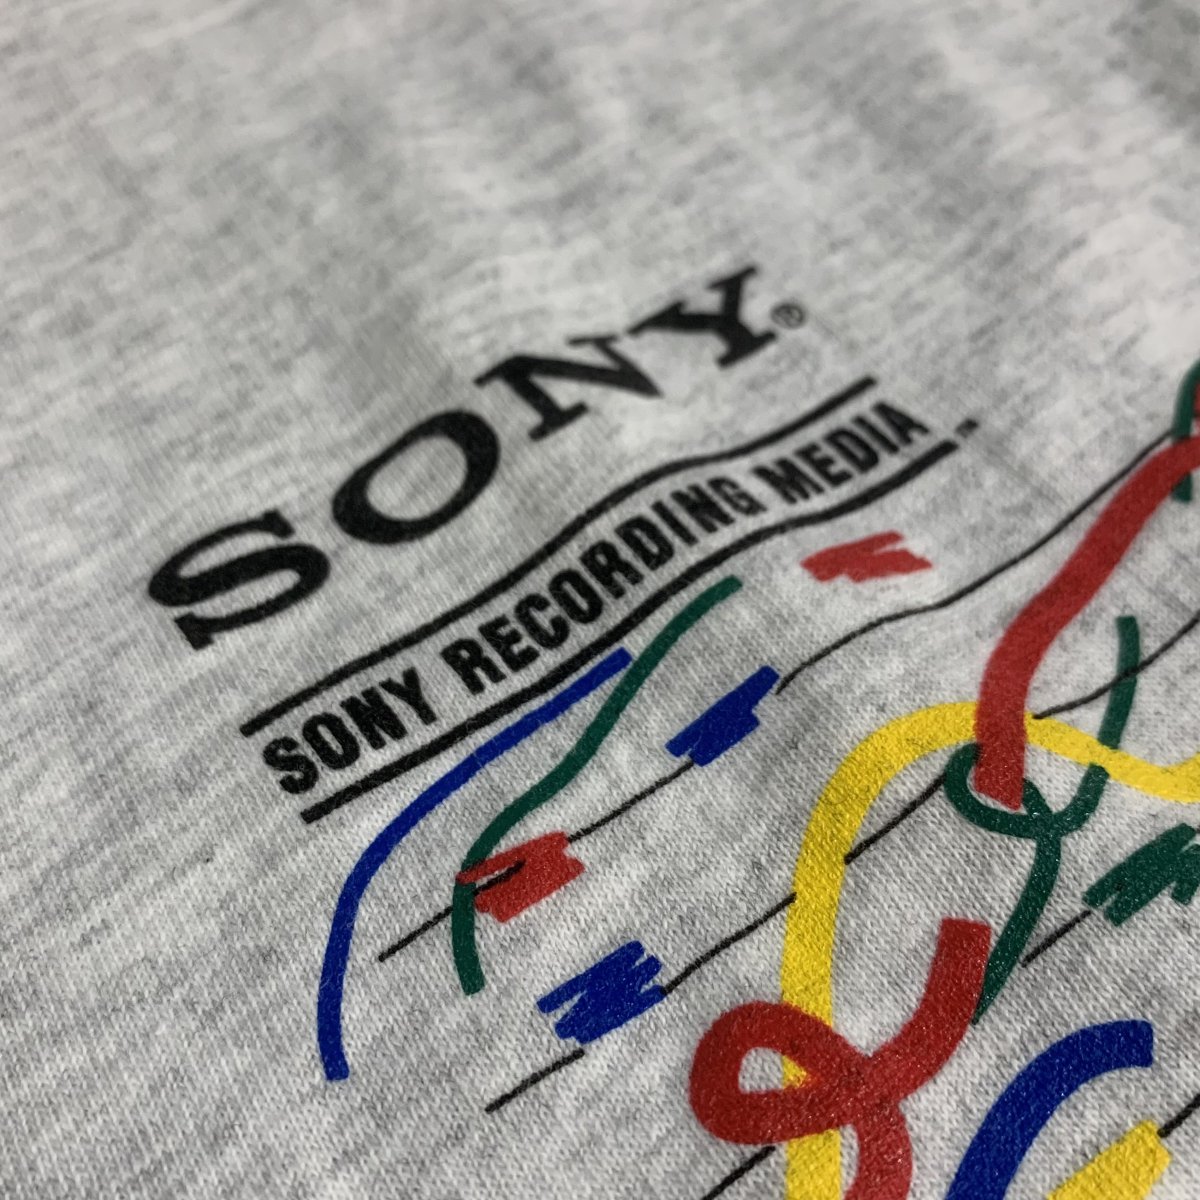 90s USA製 SONY ソニー 企業 アート プリント 半袖 Tシャツ L